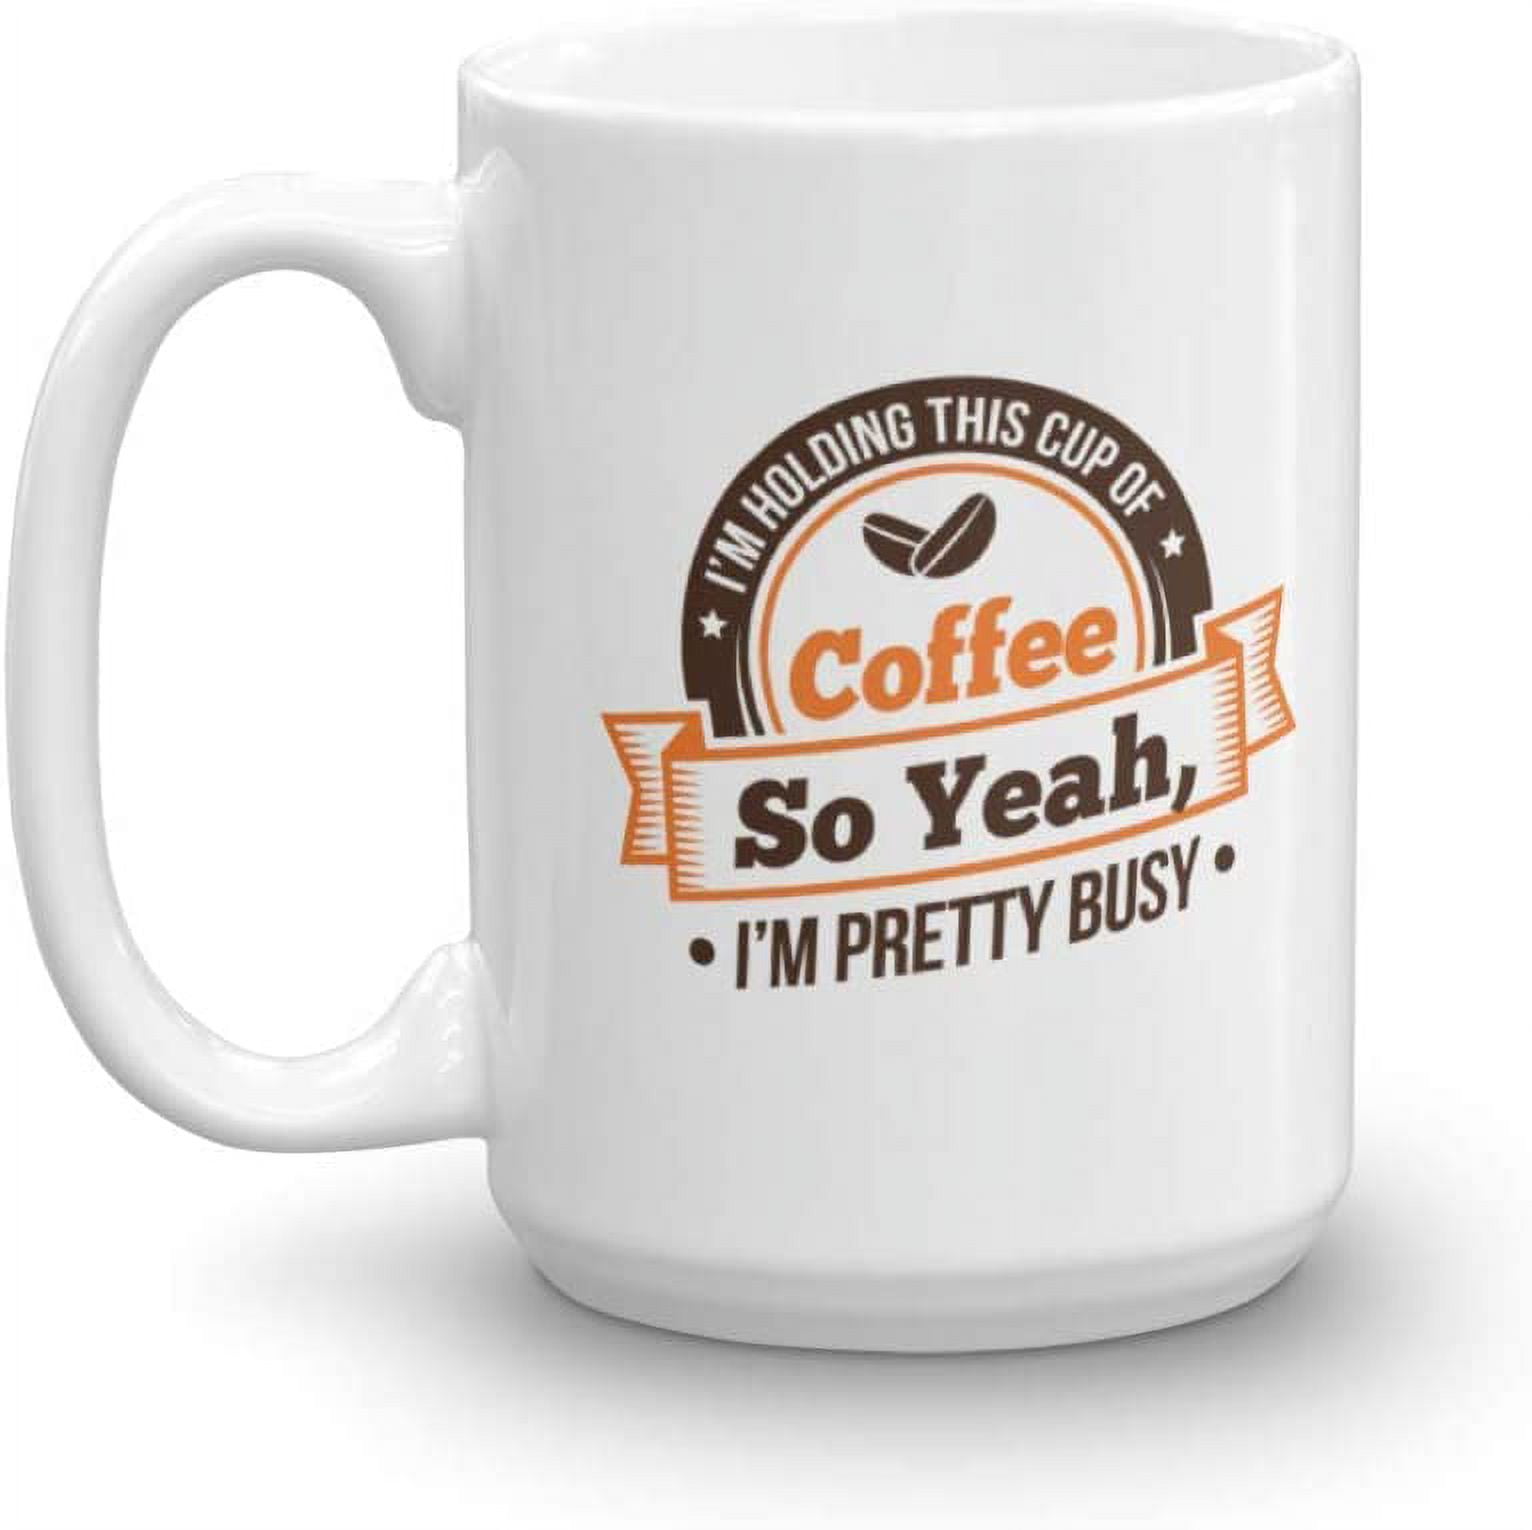 I'm Holding This Cup Of Coffee So Yeah, I'm Pretty Busy. Funny Sarcastic  Humor Quotes Coffee & Tea Mug & Fun Office Work Desk Cup For Boss, Manager